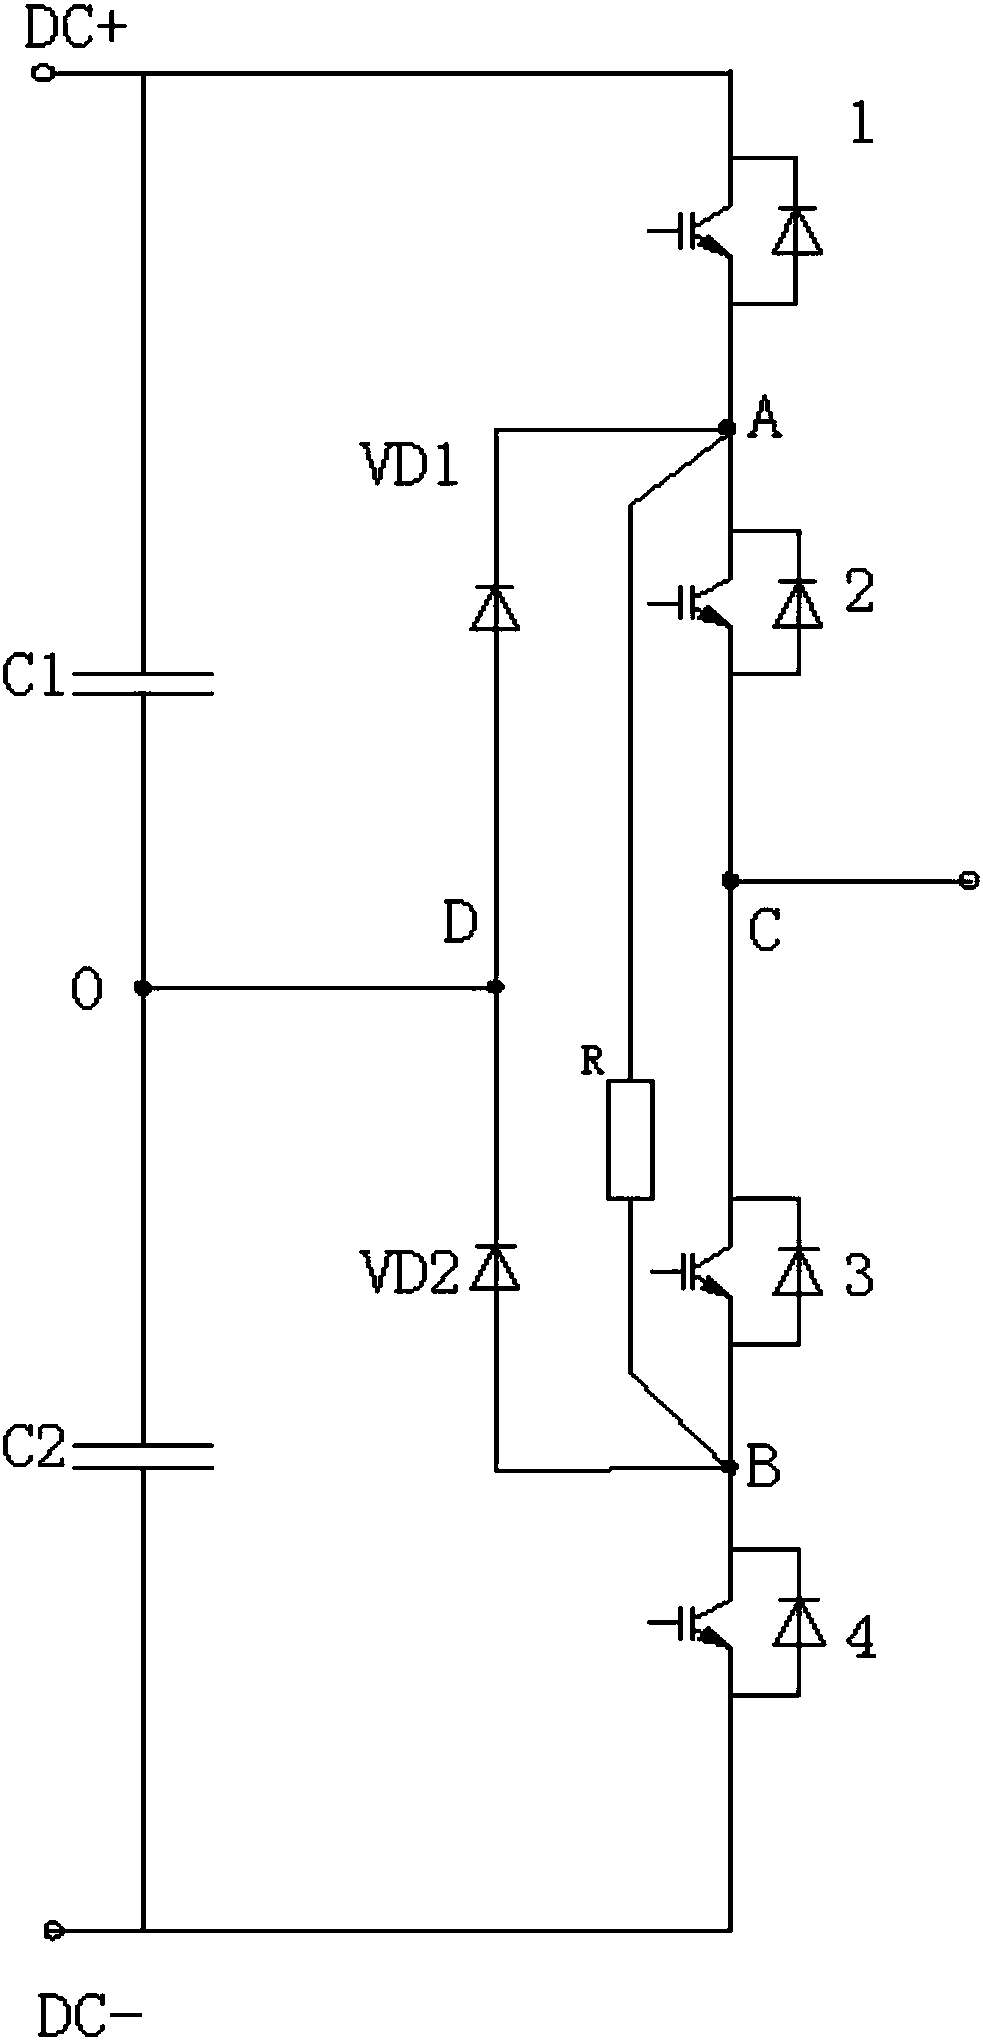 Neutral point static clamping voltage-sharing circuit for three-level inverter